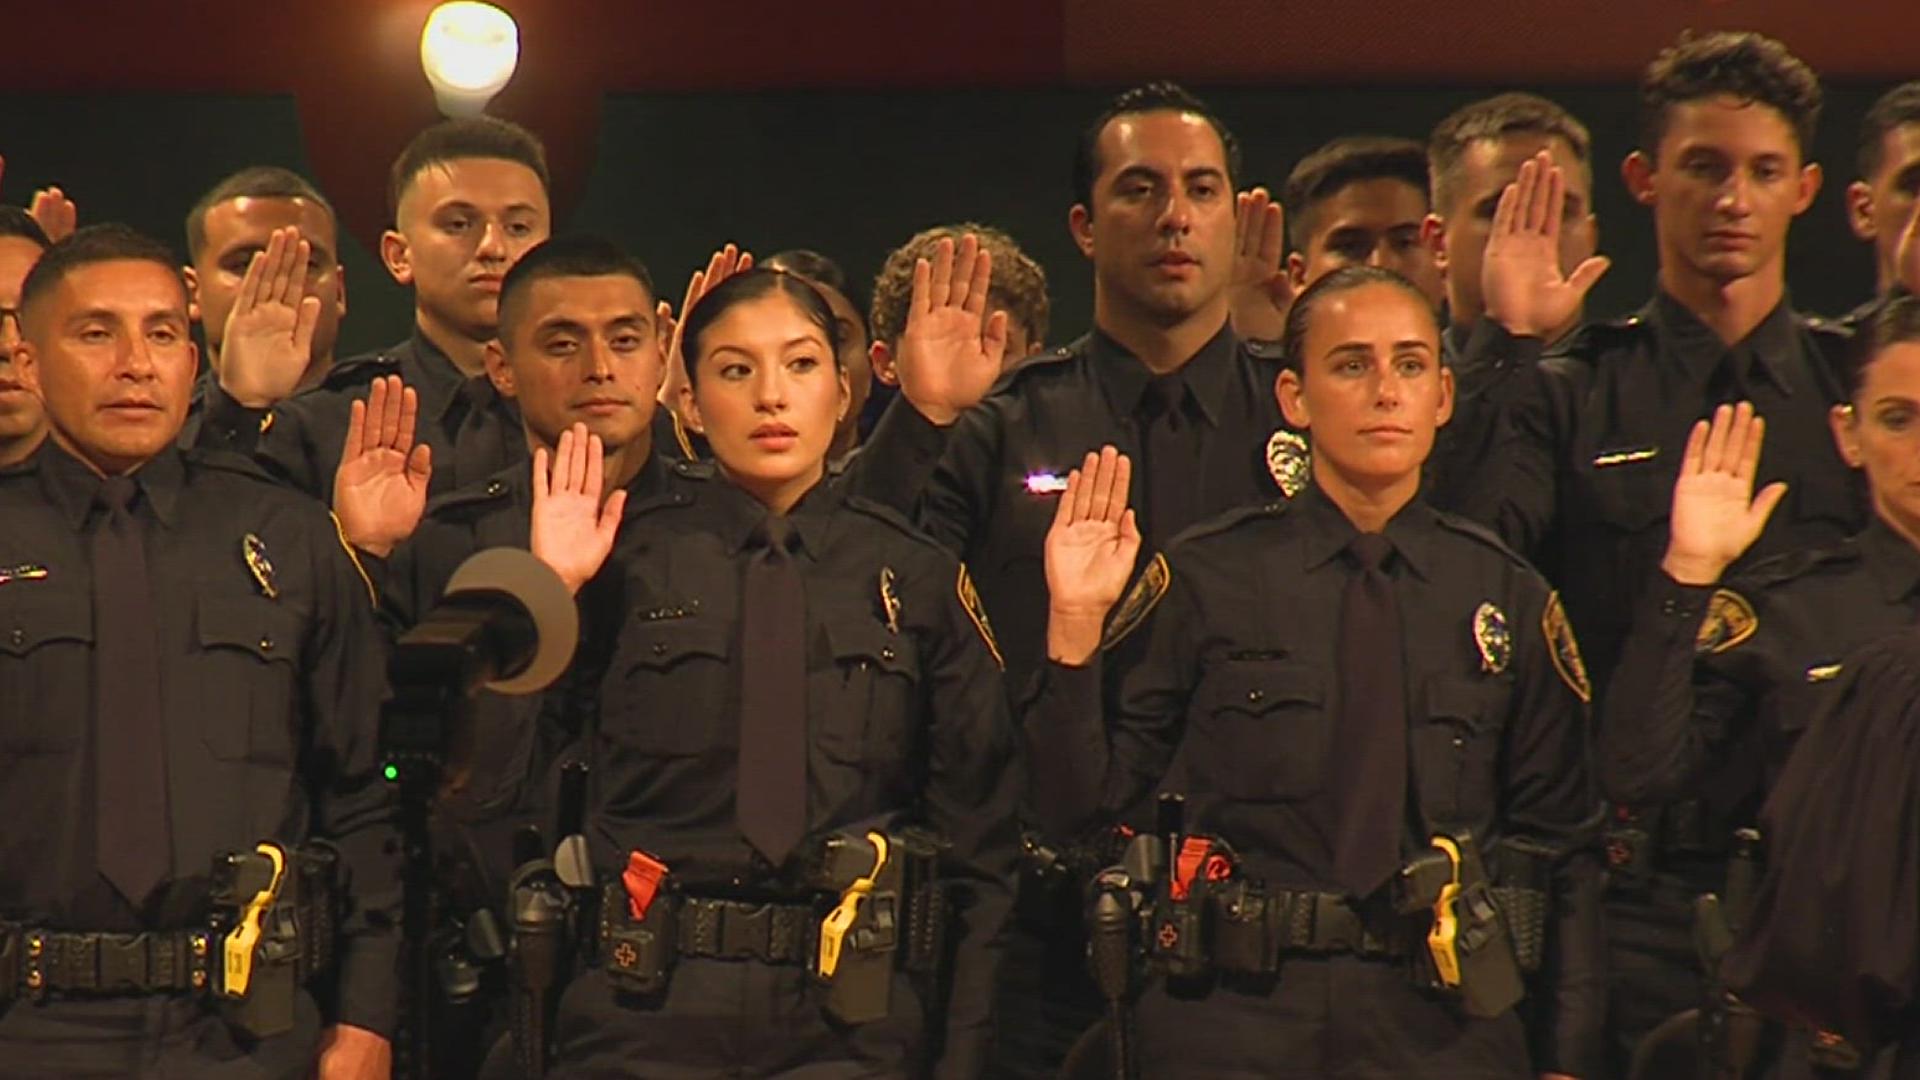 Around 30 cadets were sworn in Friday at the TAMU-CC Performing Arts Center. From all of us at 3NEWS congratulations and thank you for your service.